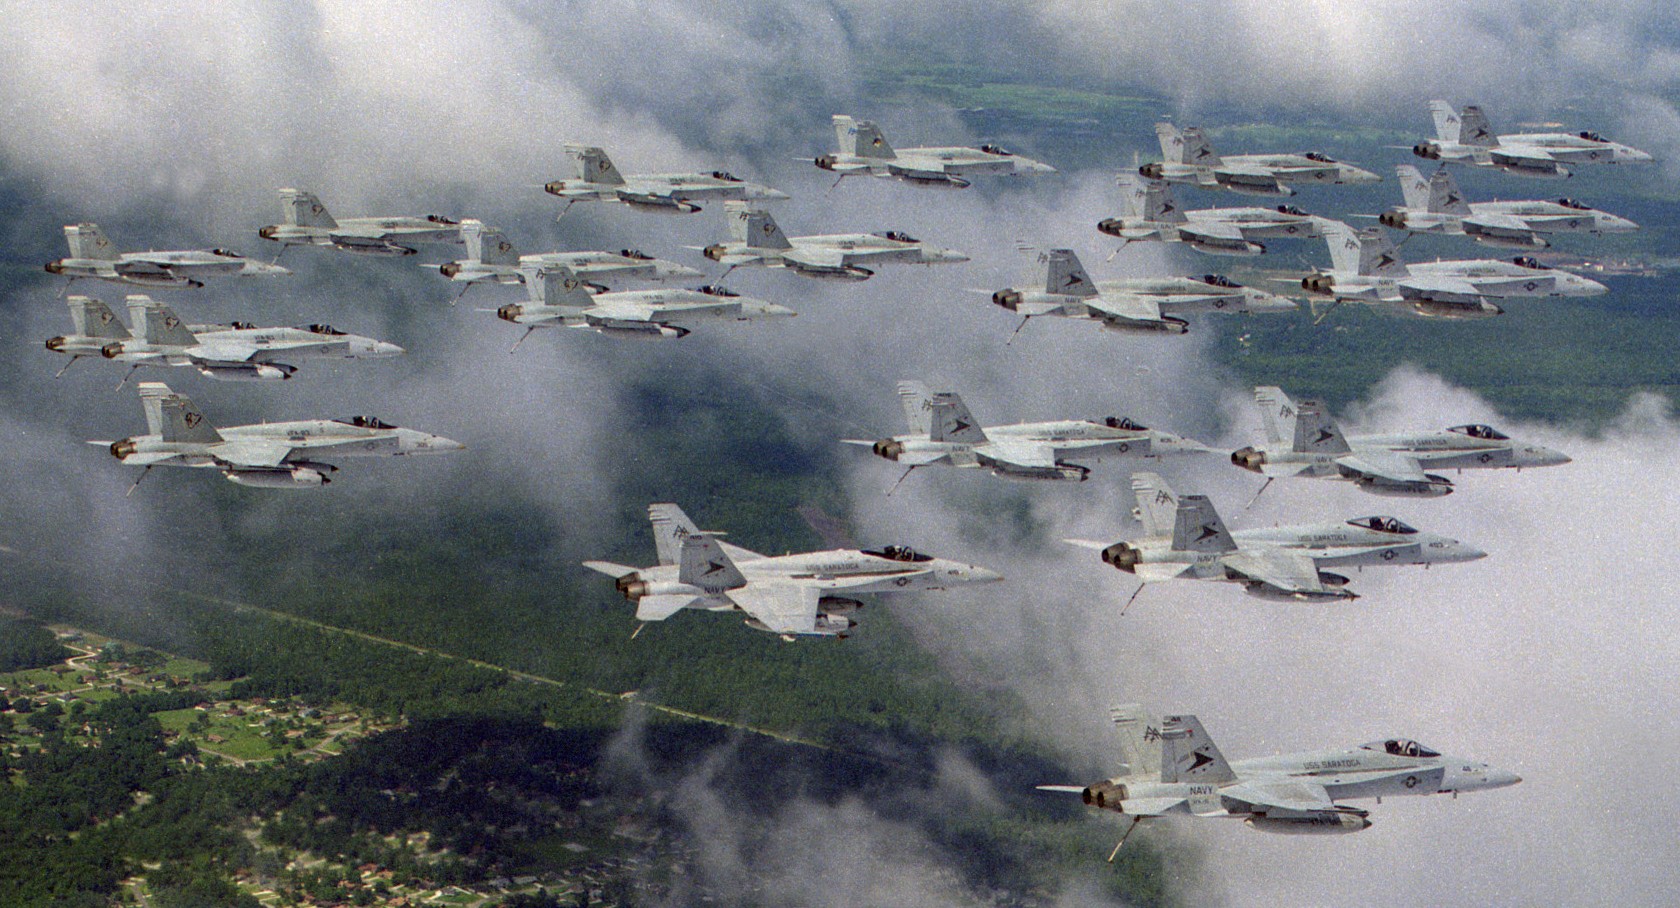 vfa-83 rampagers strike fighter squadron f/a-18c hornet cvw-17 nas cecil field florida 09